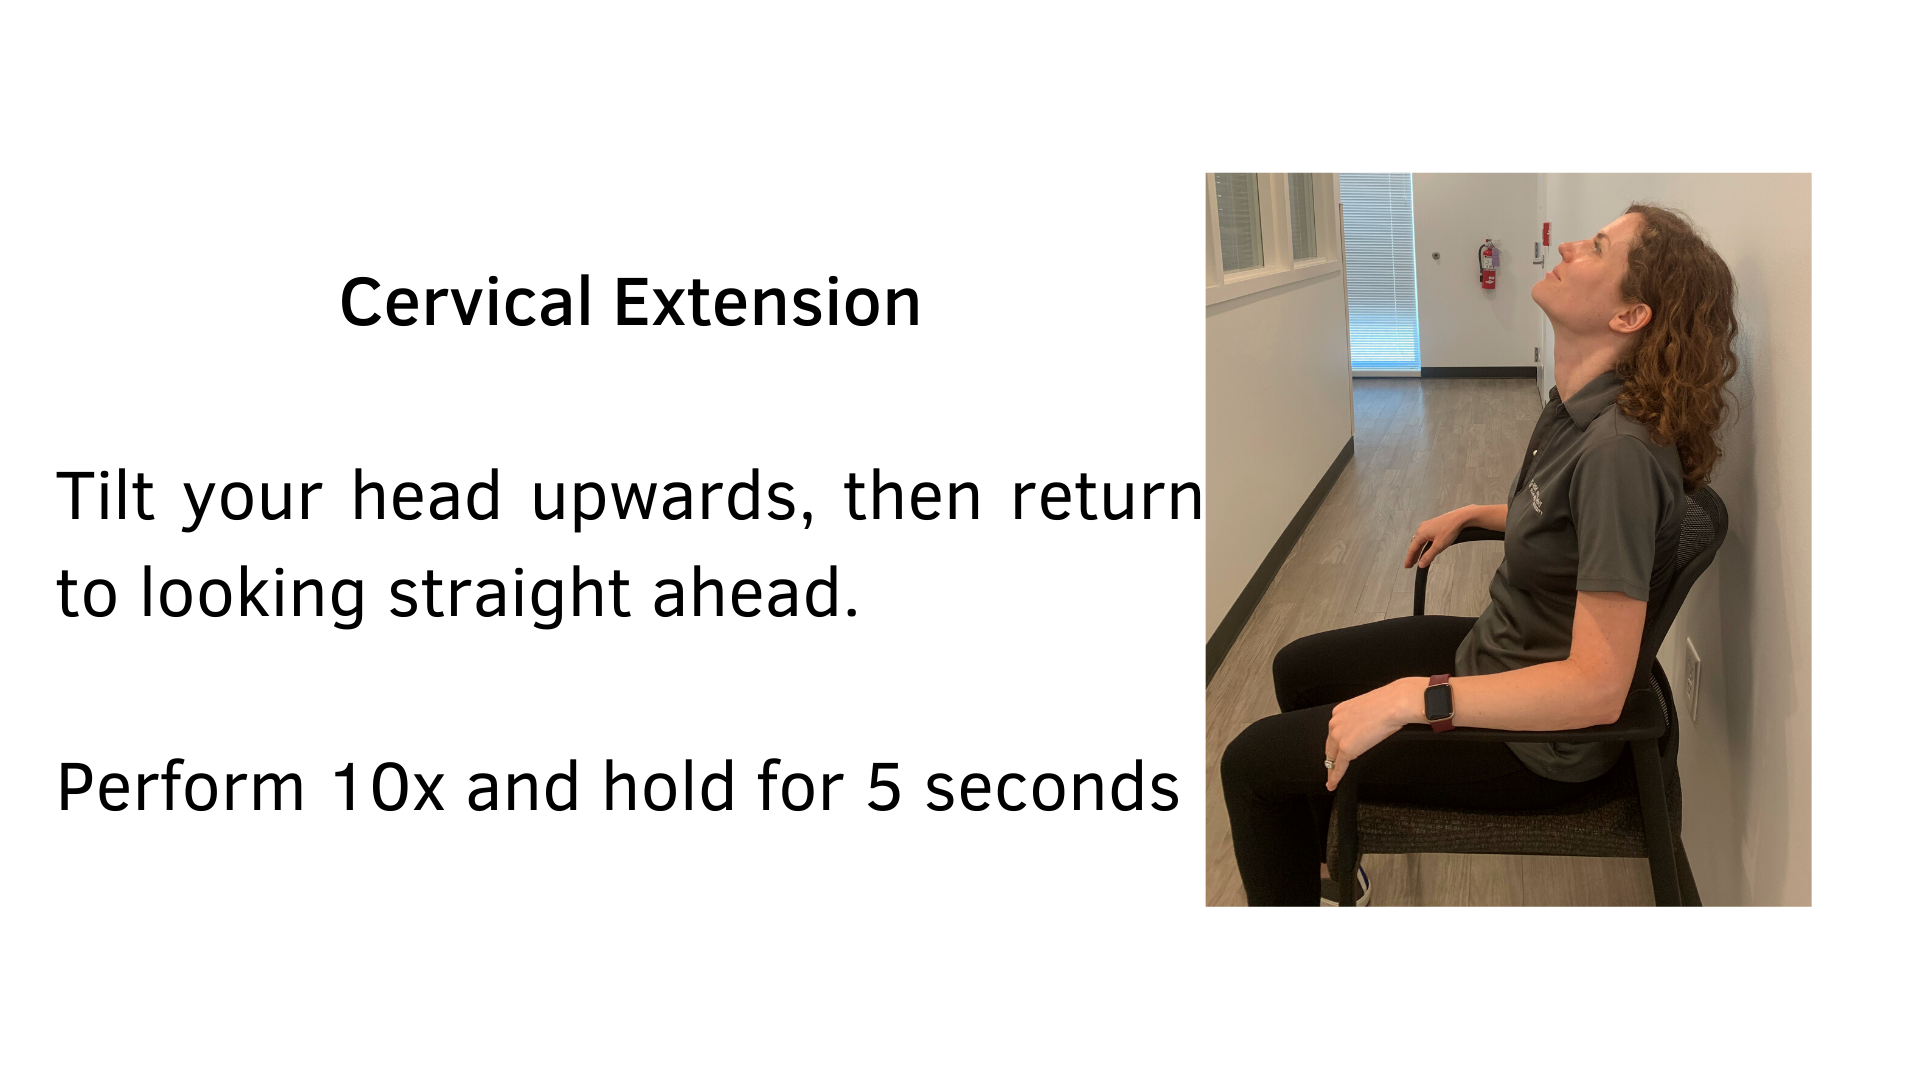 Black text on a white background that reads, "Cervical Extension: Tilt your head upwards, then return to looking straight ahead. Perform 10x and hold for 5 seconds". A picture of a woman performing the stretch while seated in a chair is featured.